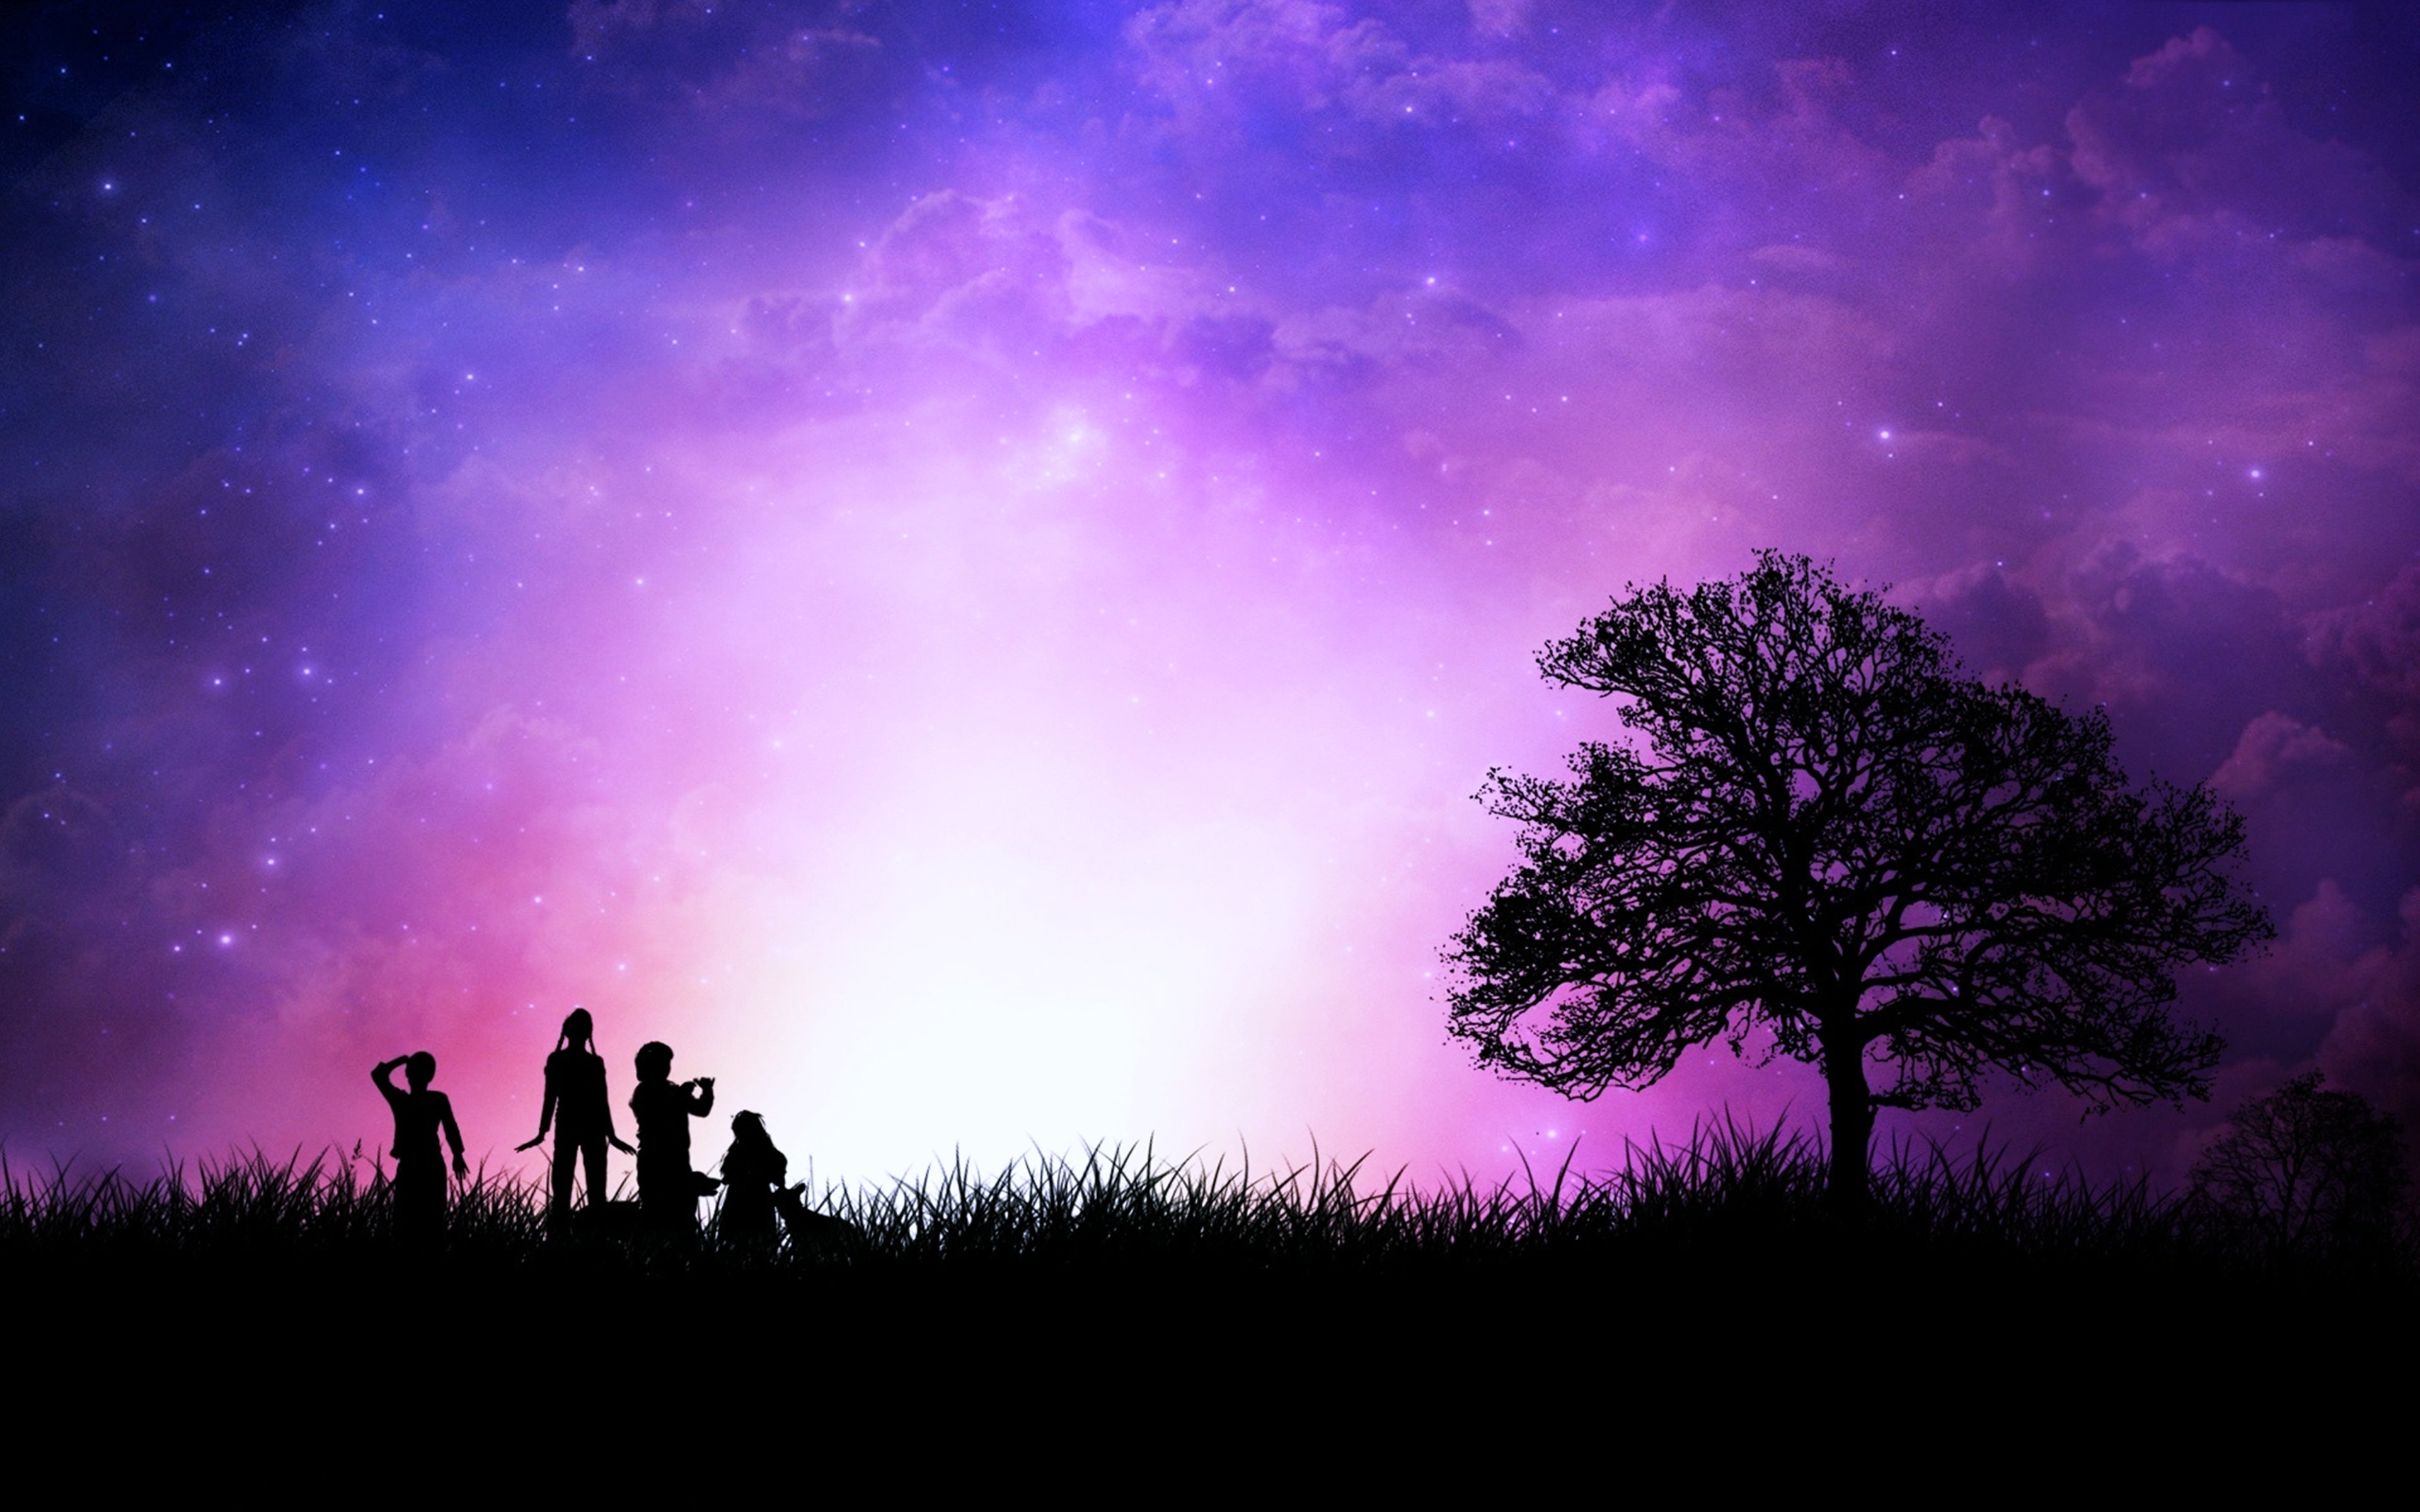 space, Stars, Sky, Tree, People, Family, Drawing, Imaginations, Fantasy, Dreams Wallpaper